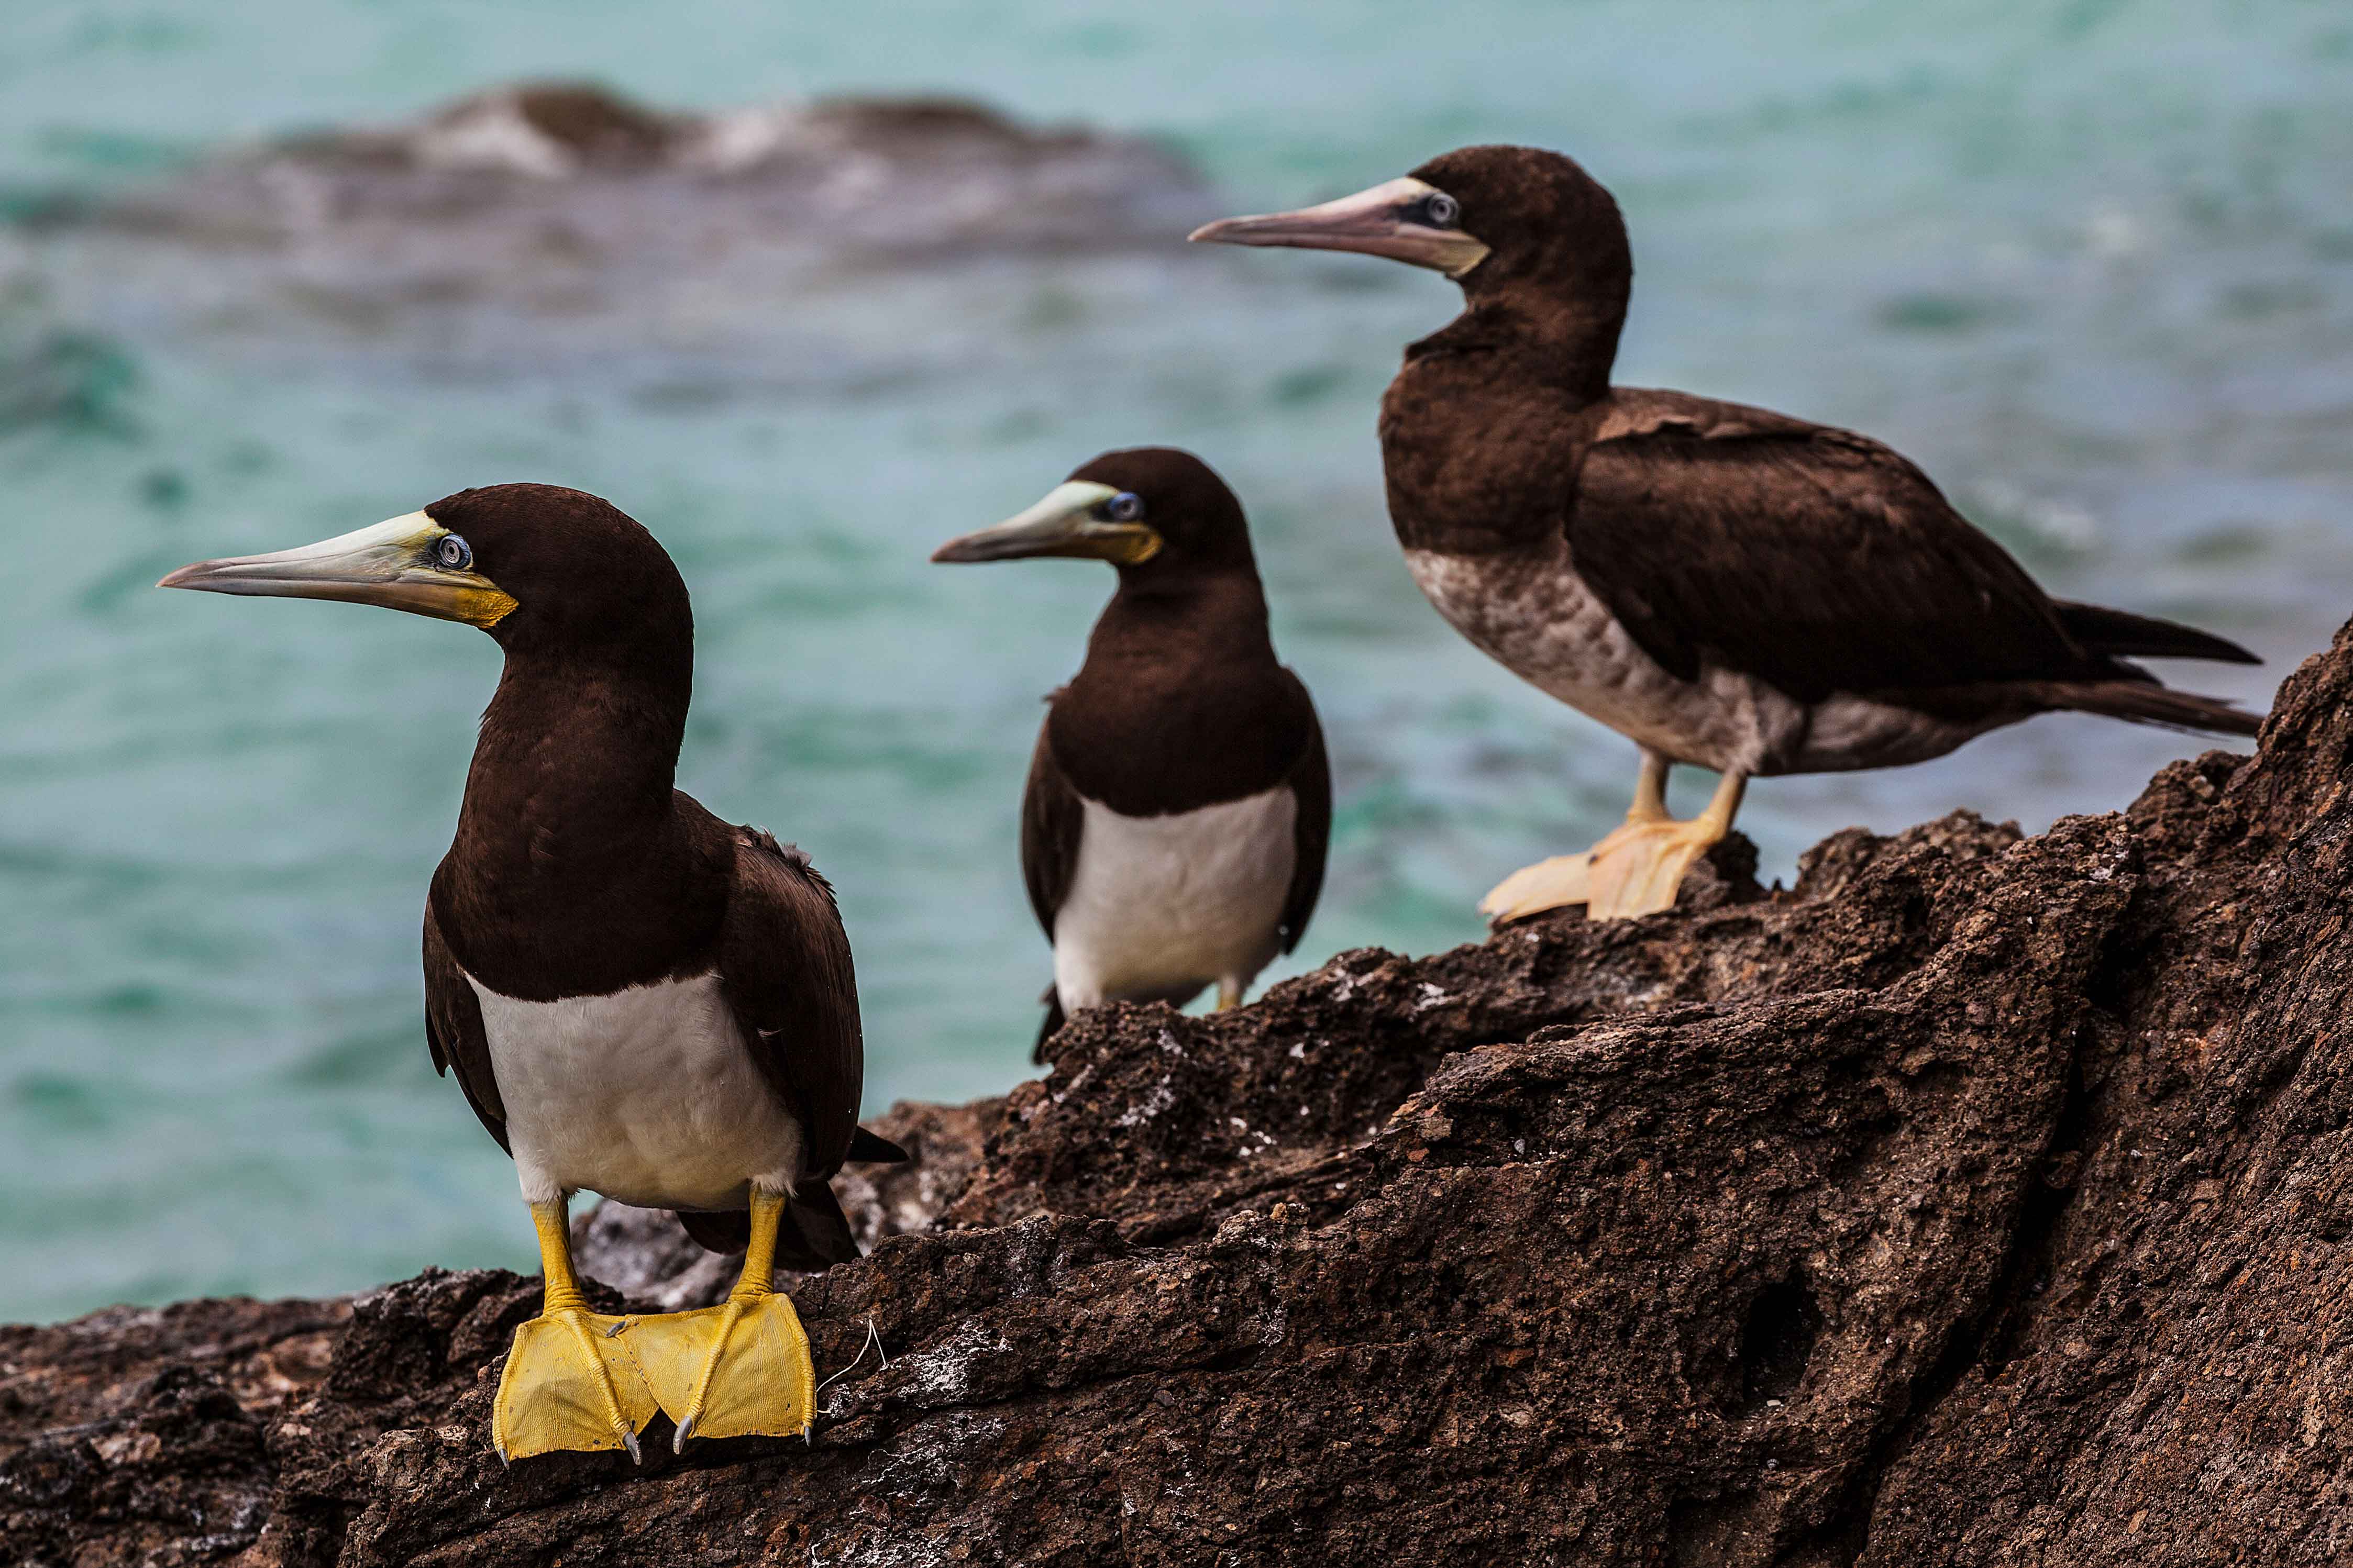 Sea Birds (Yellow-Footed Boobies) at St. Thomas in the Virgin Islands in the Caribbean Sea